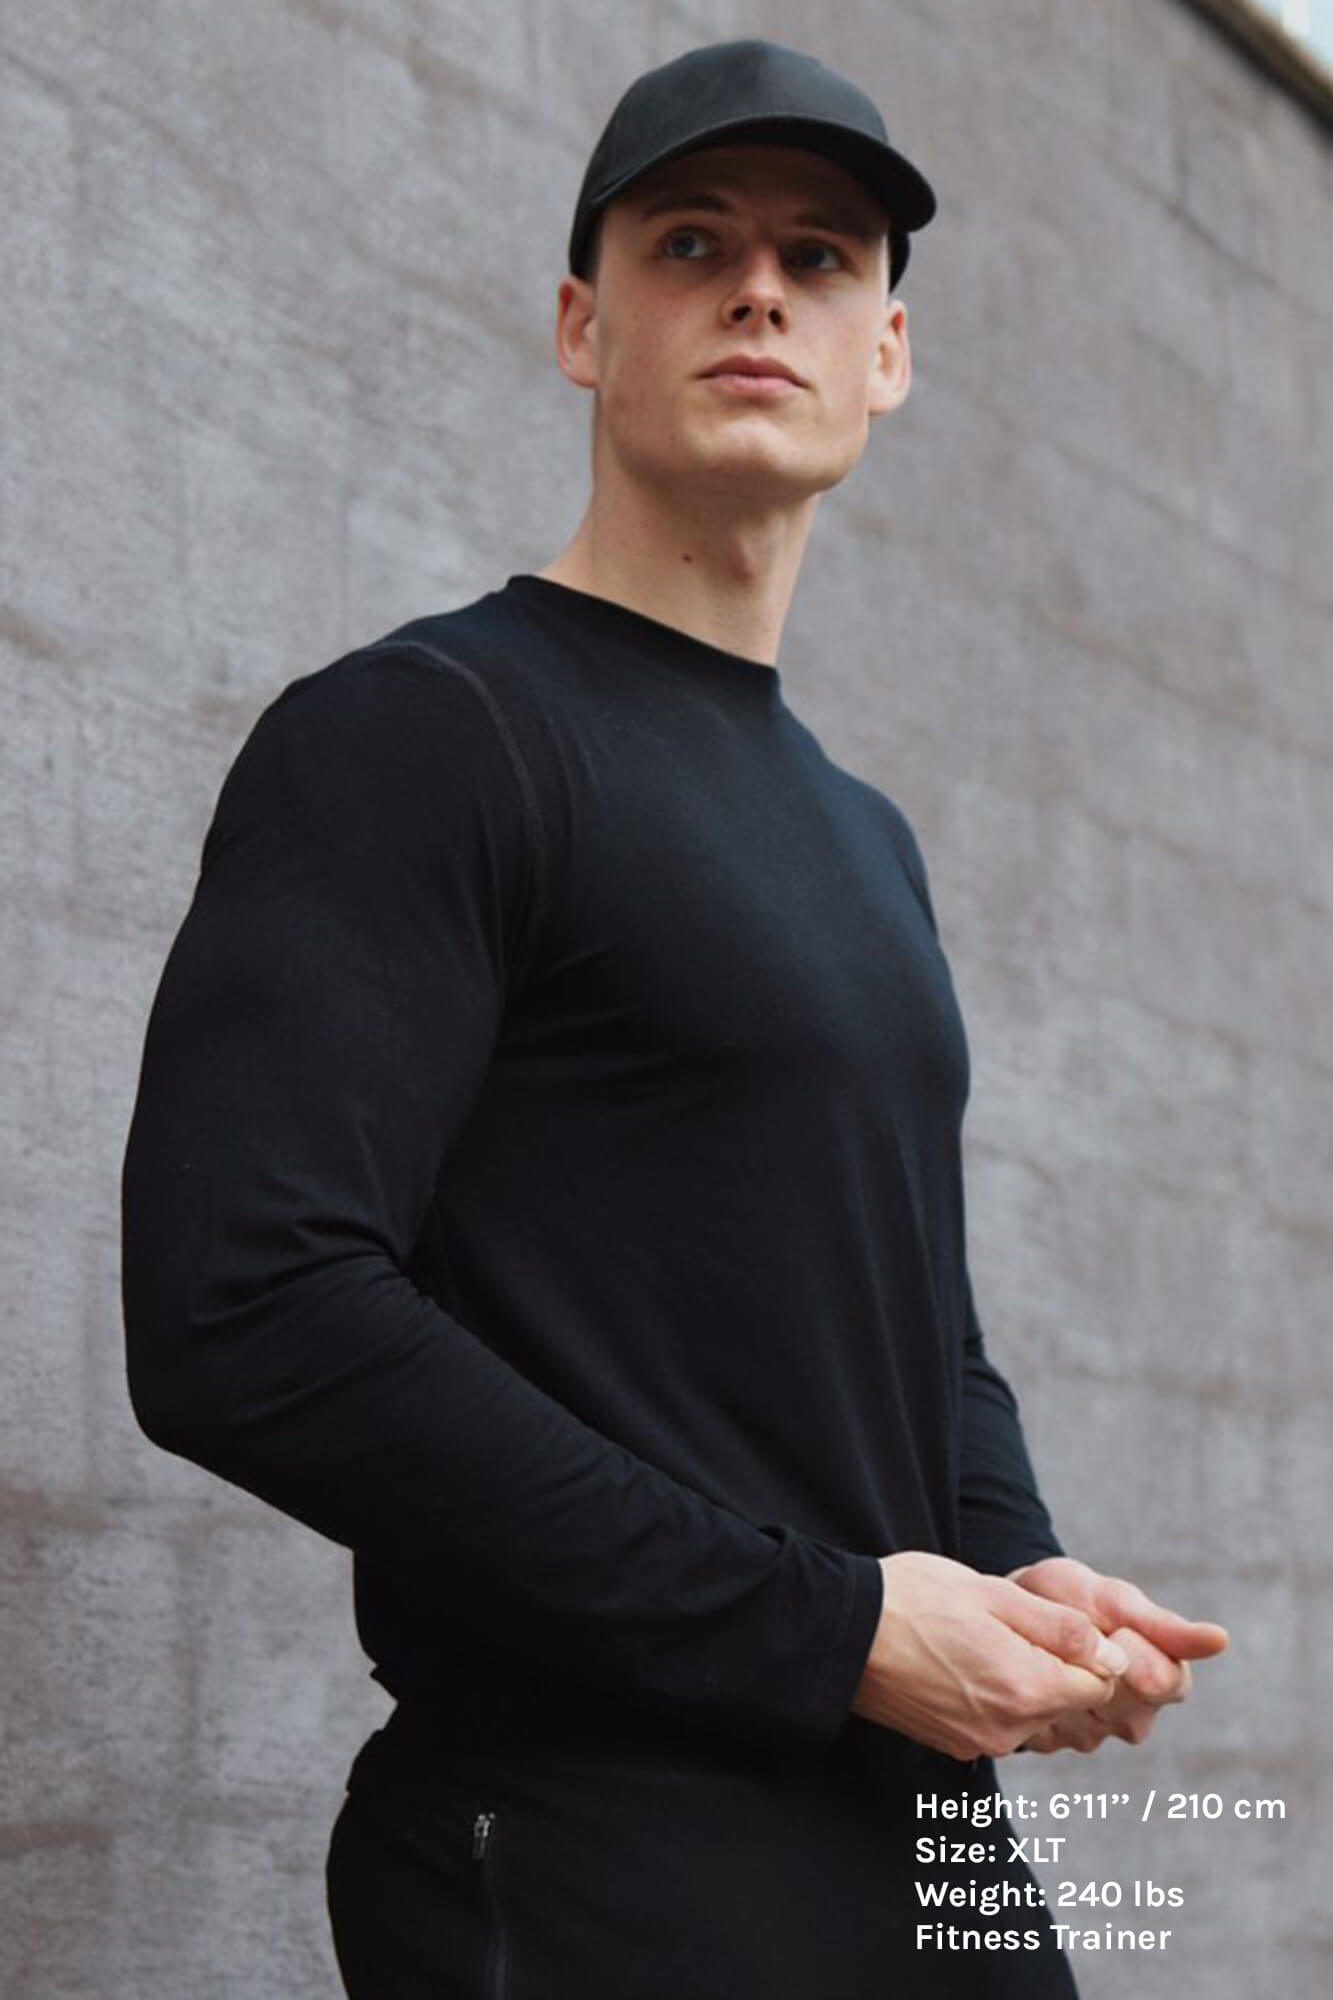 The Navas Lab Mac xlt mens shirts for tall men in black. The perfect tall slim shirt for tall and slim guys looking for style and comfort.